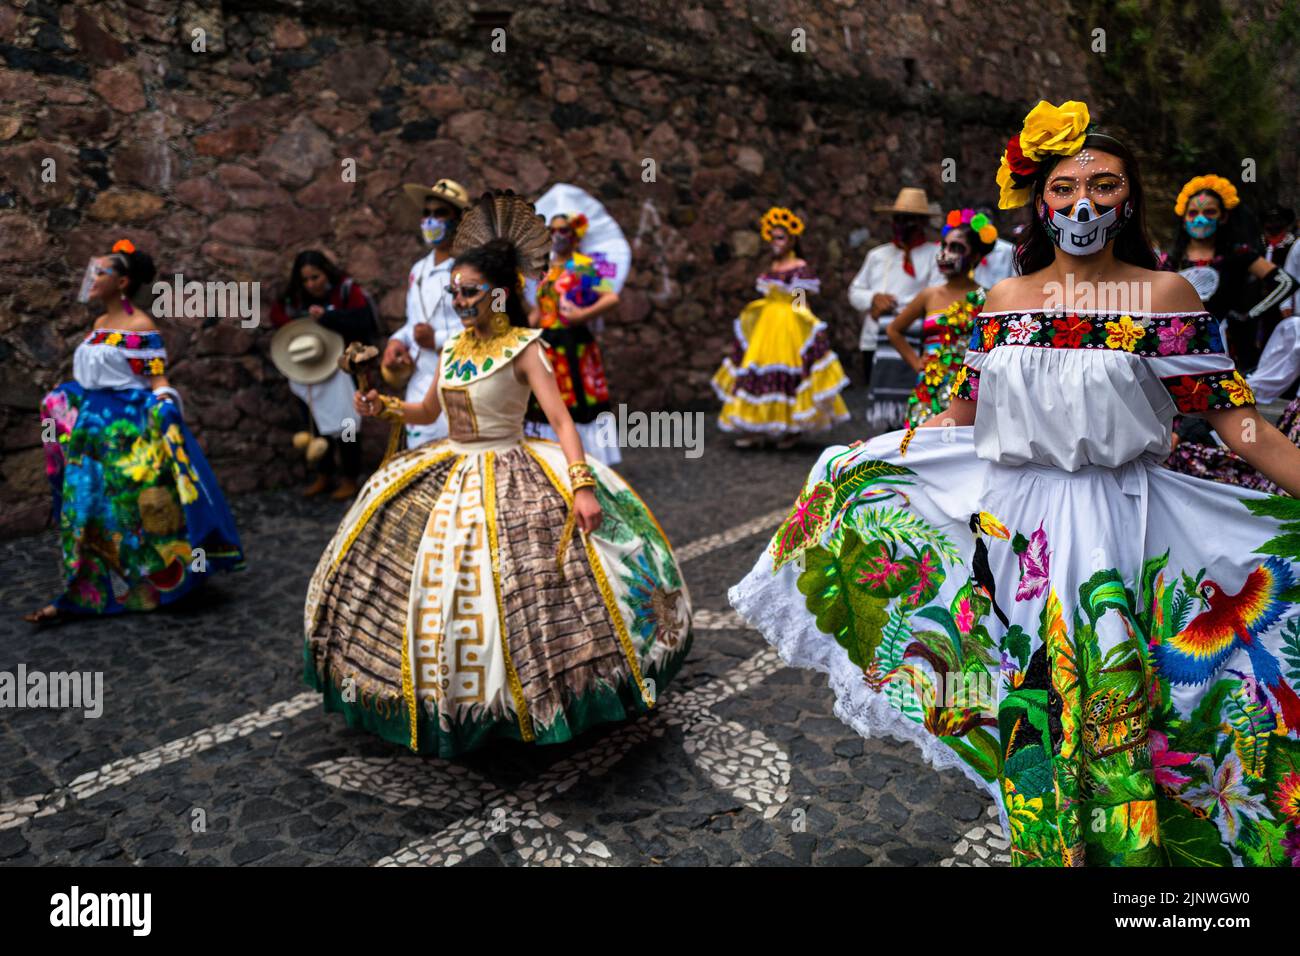 Mexican women, dressed as La Catrina, a Mexican pop culture icon representing the Death, dance in the Day of the Dead parade in Taxco, Mexico. Stock Photo